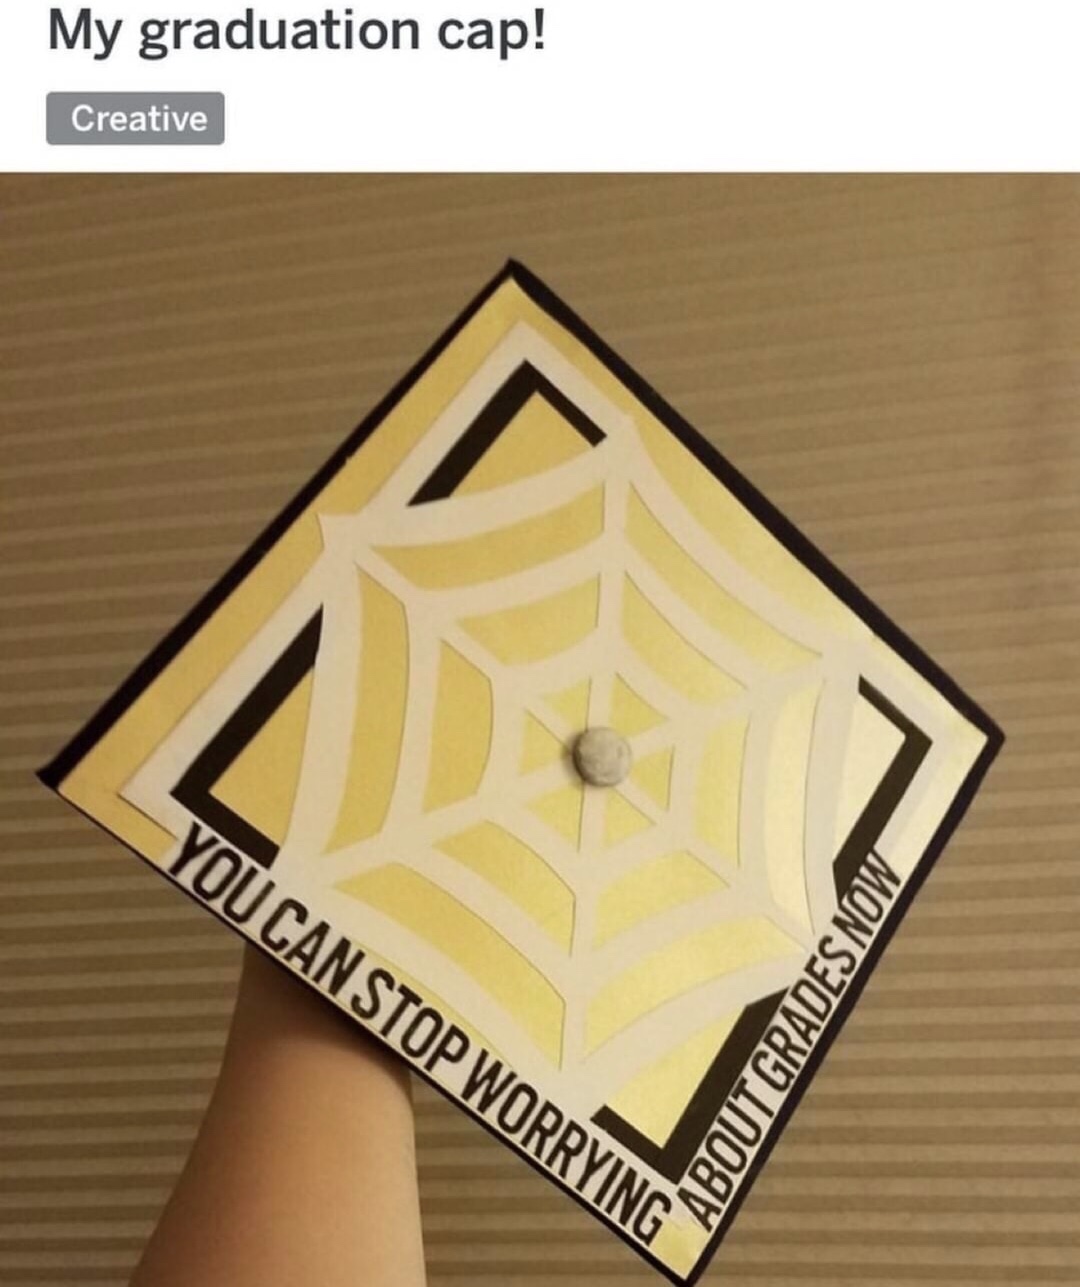 Monday meme with pic of a graduation cap saying